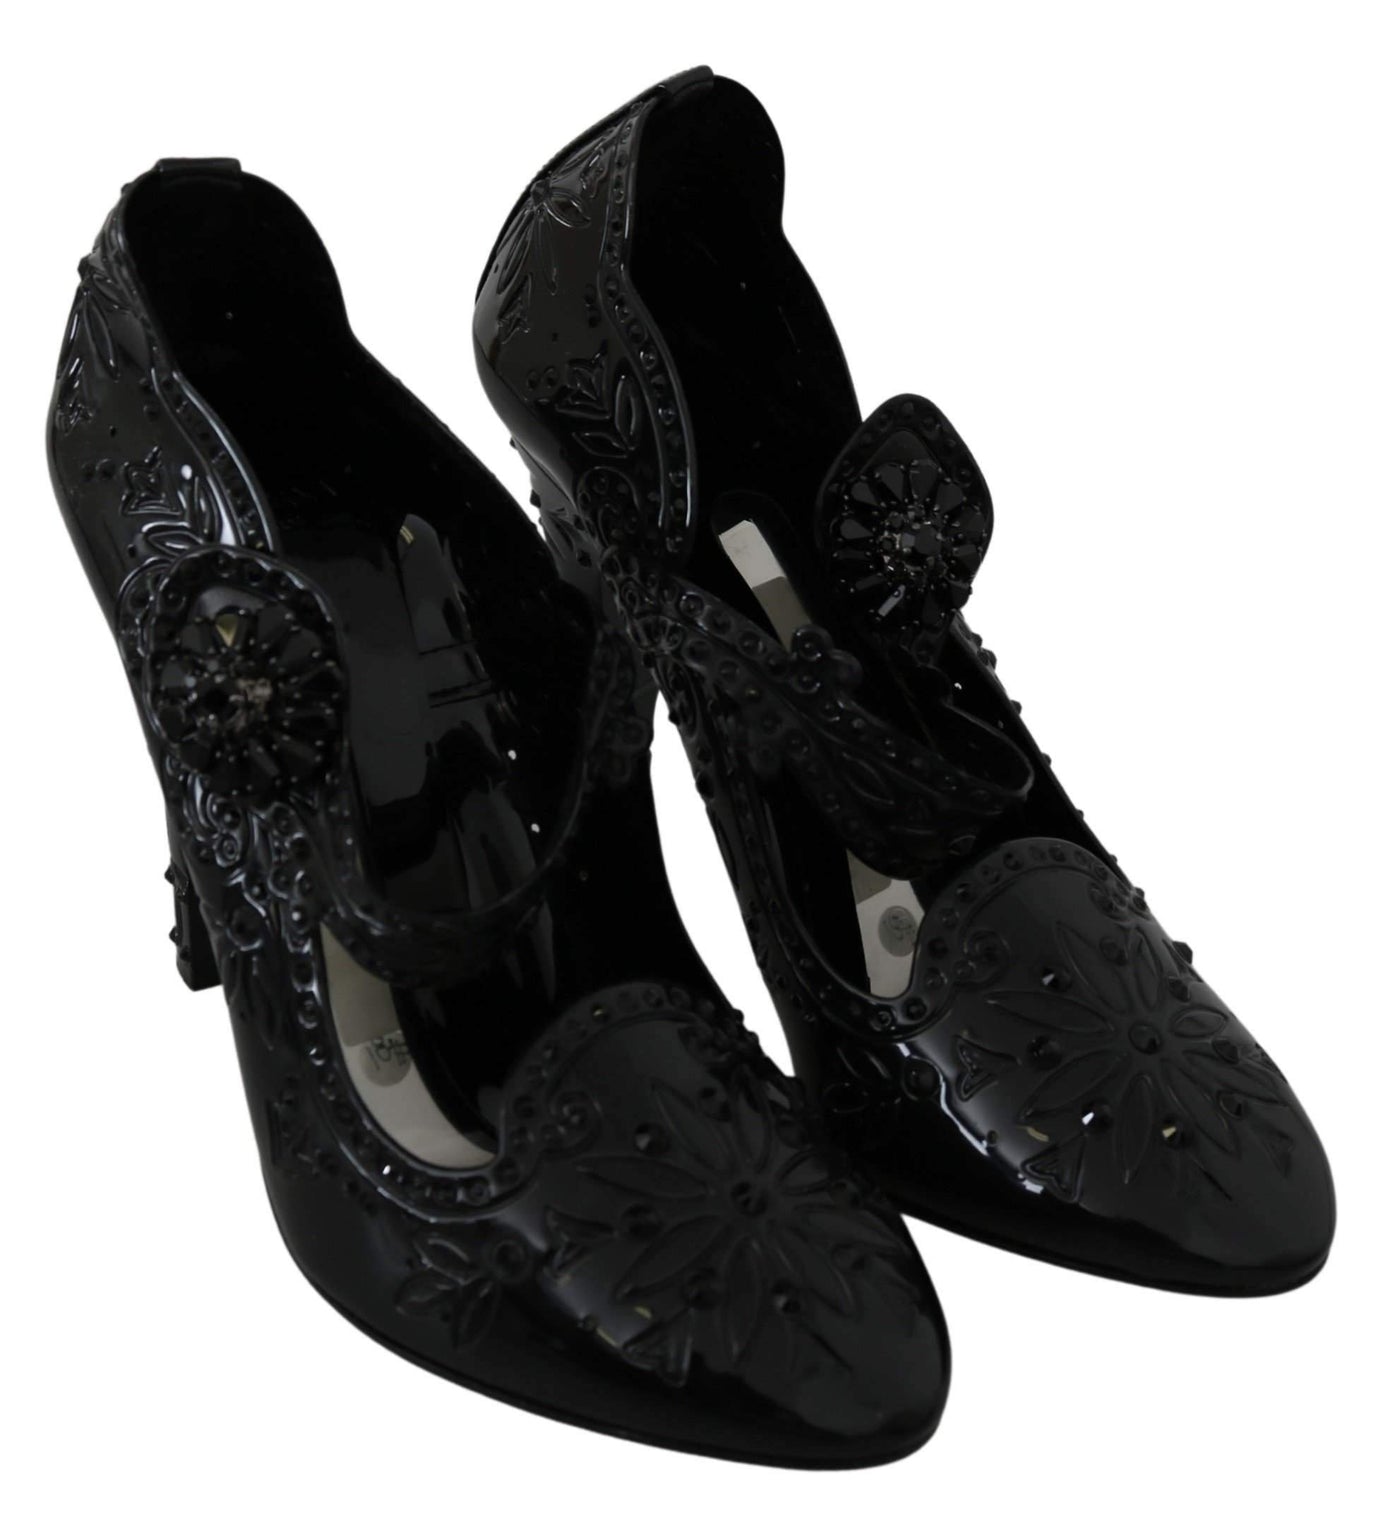 Dolce & Gabbana Black Floral Crystal CINDERELLA Heels Shoes #women, Black, Brand_Dolce & Gabbana, Dolce & Gabbana, EU39/US8.5, feed-agegroup-adult, feed-color-black, feed-gender-female, feed-size-US8.5, Gender_Women, Pumps - Women - Shoes, Shoes - New Arrivals at SEYMAYKA